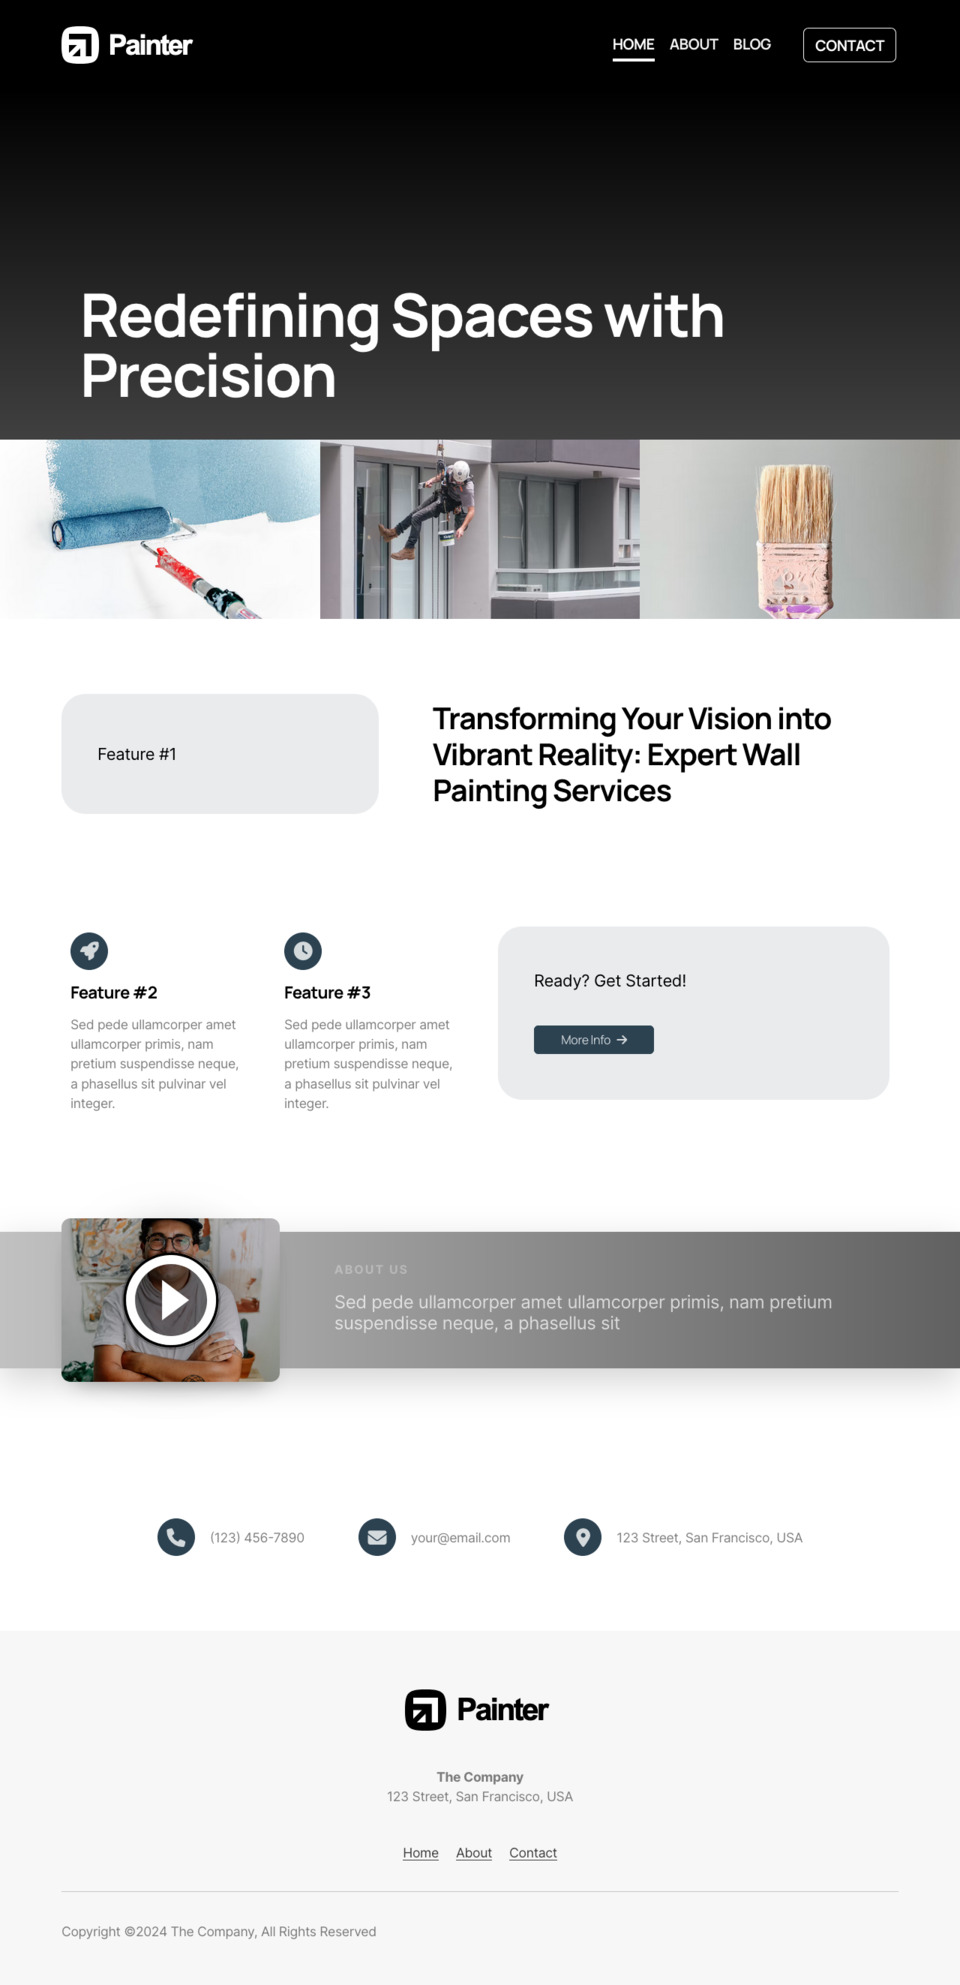 Painter Website Template - Ideal for house painting businesses, home renovation services, Handyman services, Painting contractors, and other related industries.